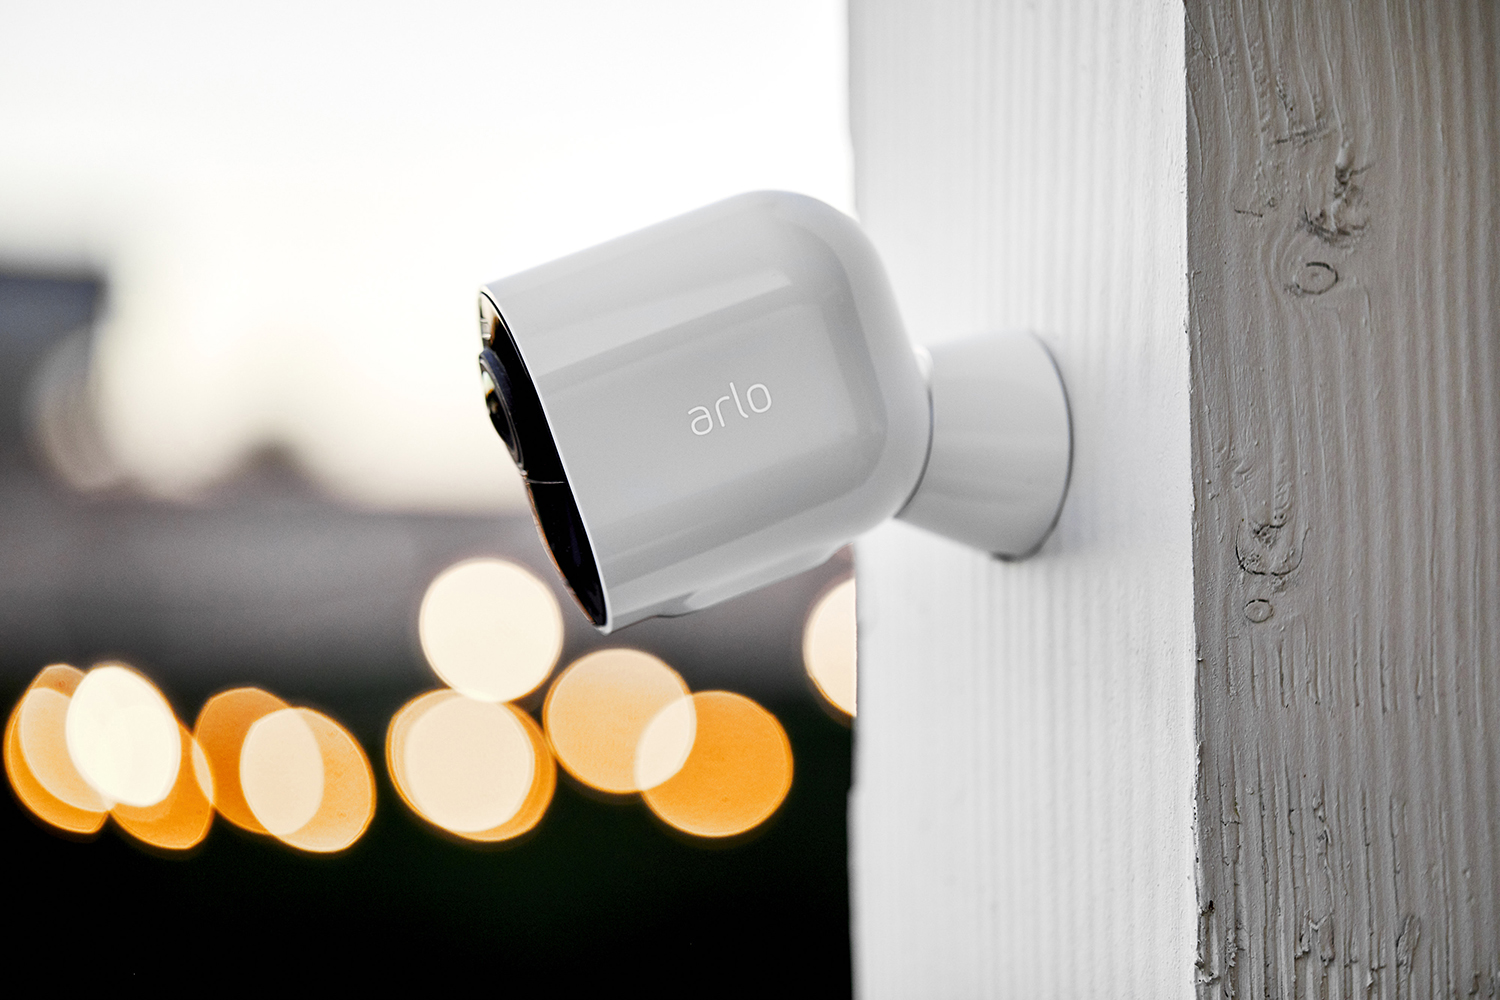 Arlo’s flagship security camera is coming to Australia later this mon...